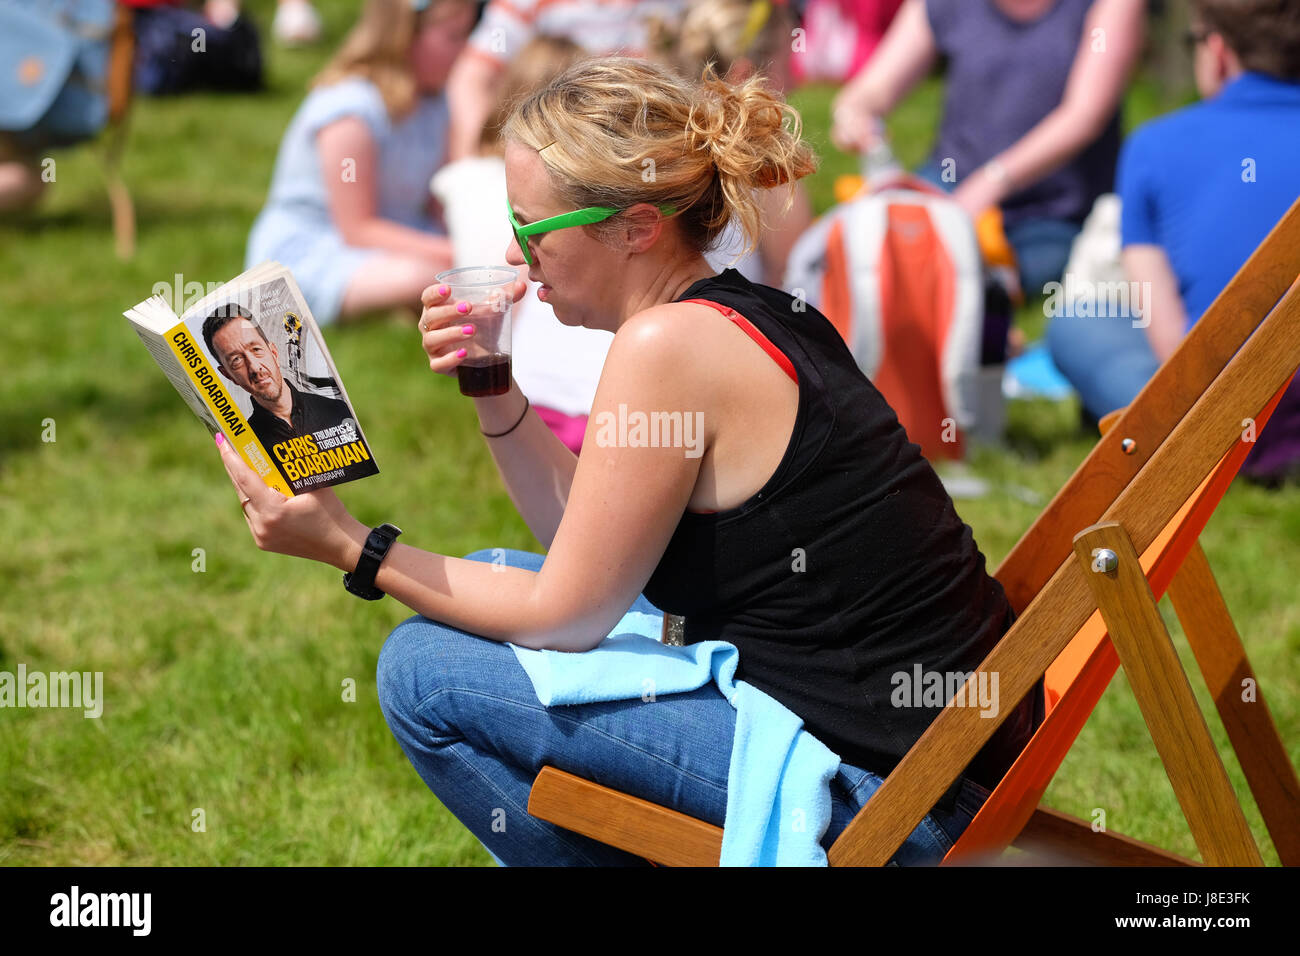 Hay Festival 2017 - Hay on Wye, Wales, UK - May 2017 - Hot sunshine on Day 4 of the Hay Festival - a visitor enjoys reading the new Chris Boardman autobiography Triumphs and Turbulence on the Festival lawns - Credit: Steven May/Alamy Live News Stock Photo